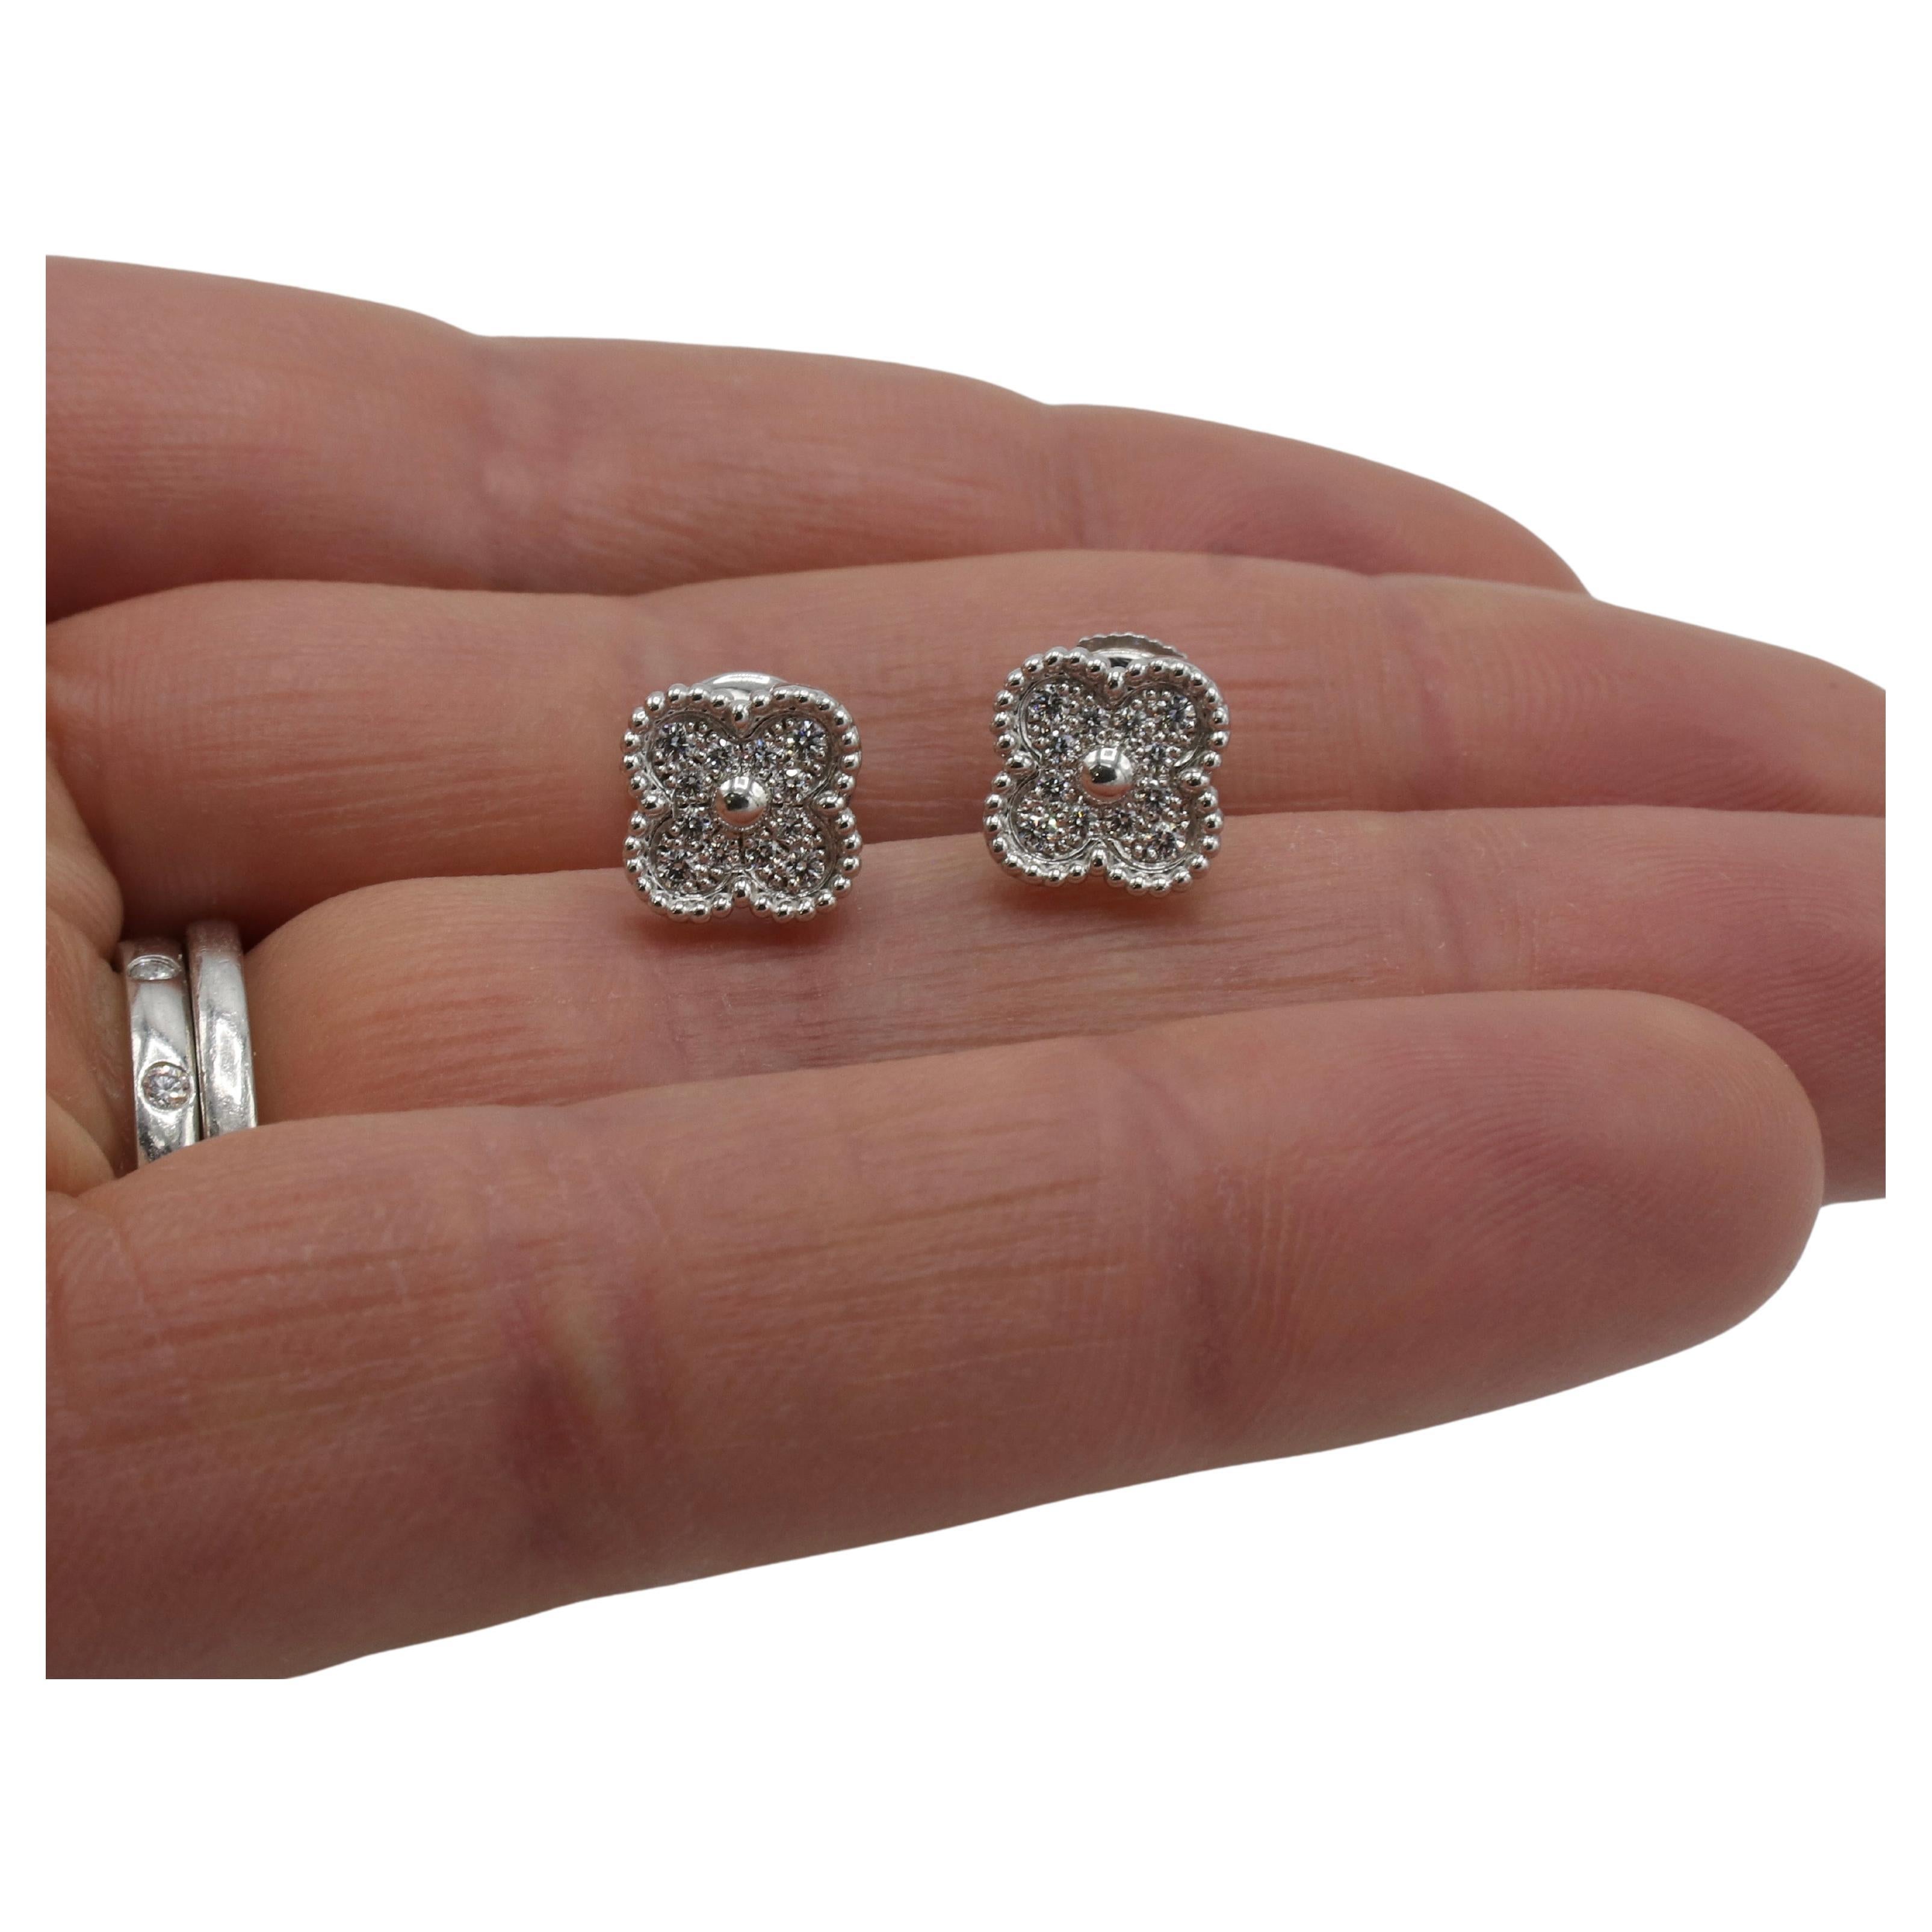 Van Cleef & Arpels VCA Sweet Alhambra White Gold Natural Diamond Stud Earrings 
Metal: 18 karat white gold
Weight: 3.25 grams
Diamonds: Approx. 0.16 carats round natural diamonds DEF, IF-VVS
Dimensions: 9.5 x 9.5mm 
Retail: $6,000 USD
